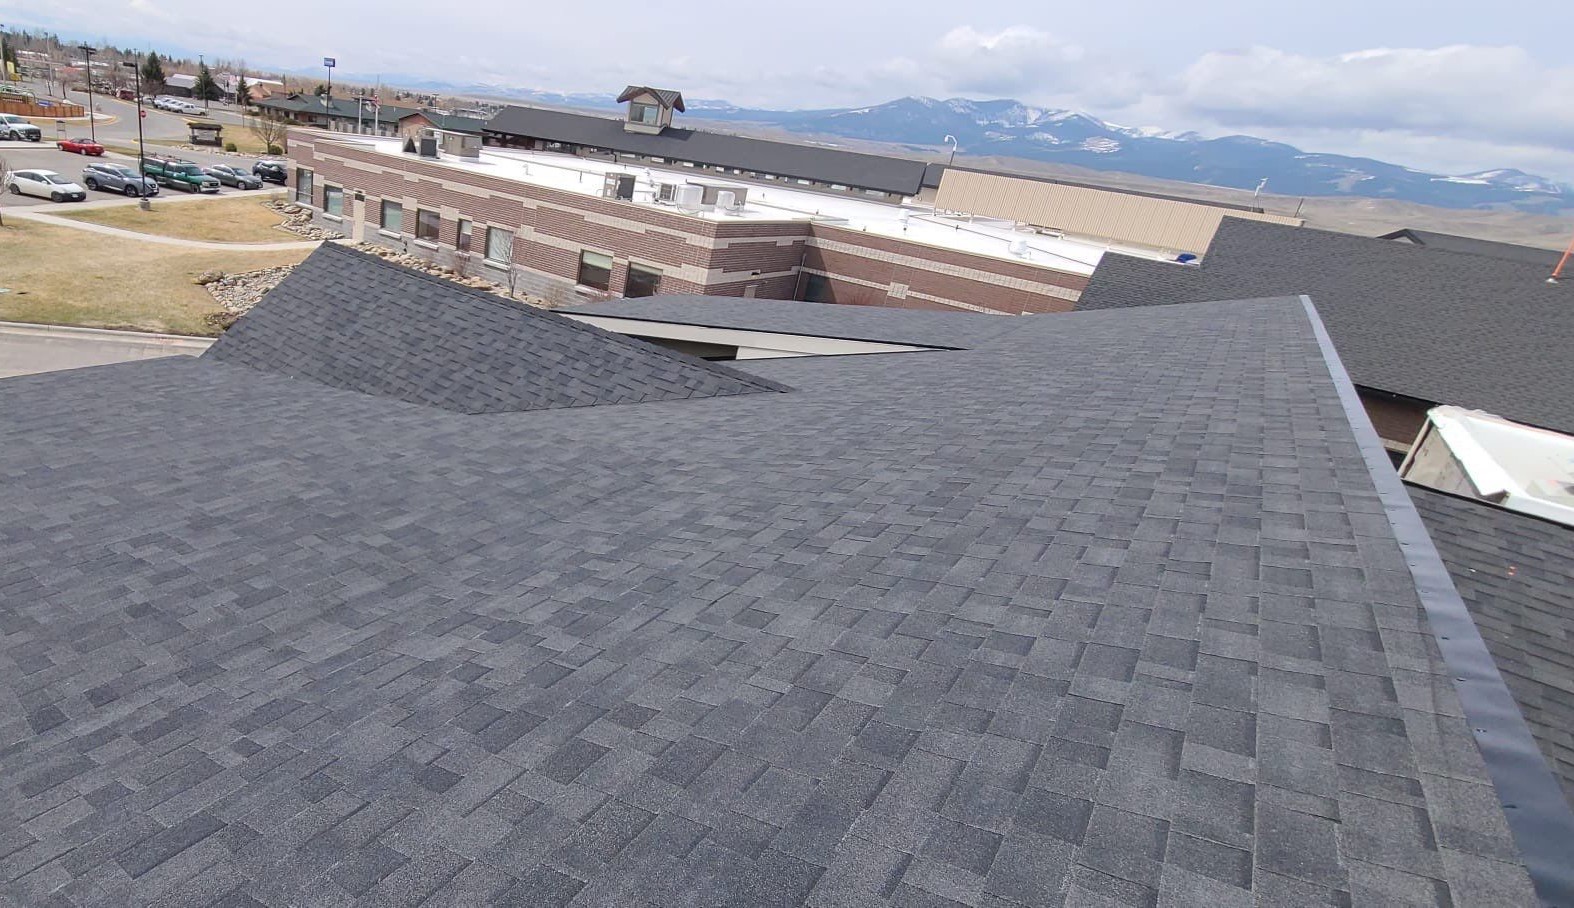 Expansive view of a complex commercial roof with architectural shingles, featuring the majestic mountain landscape in the background, highlighting a blend of functional design and natural beauty.